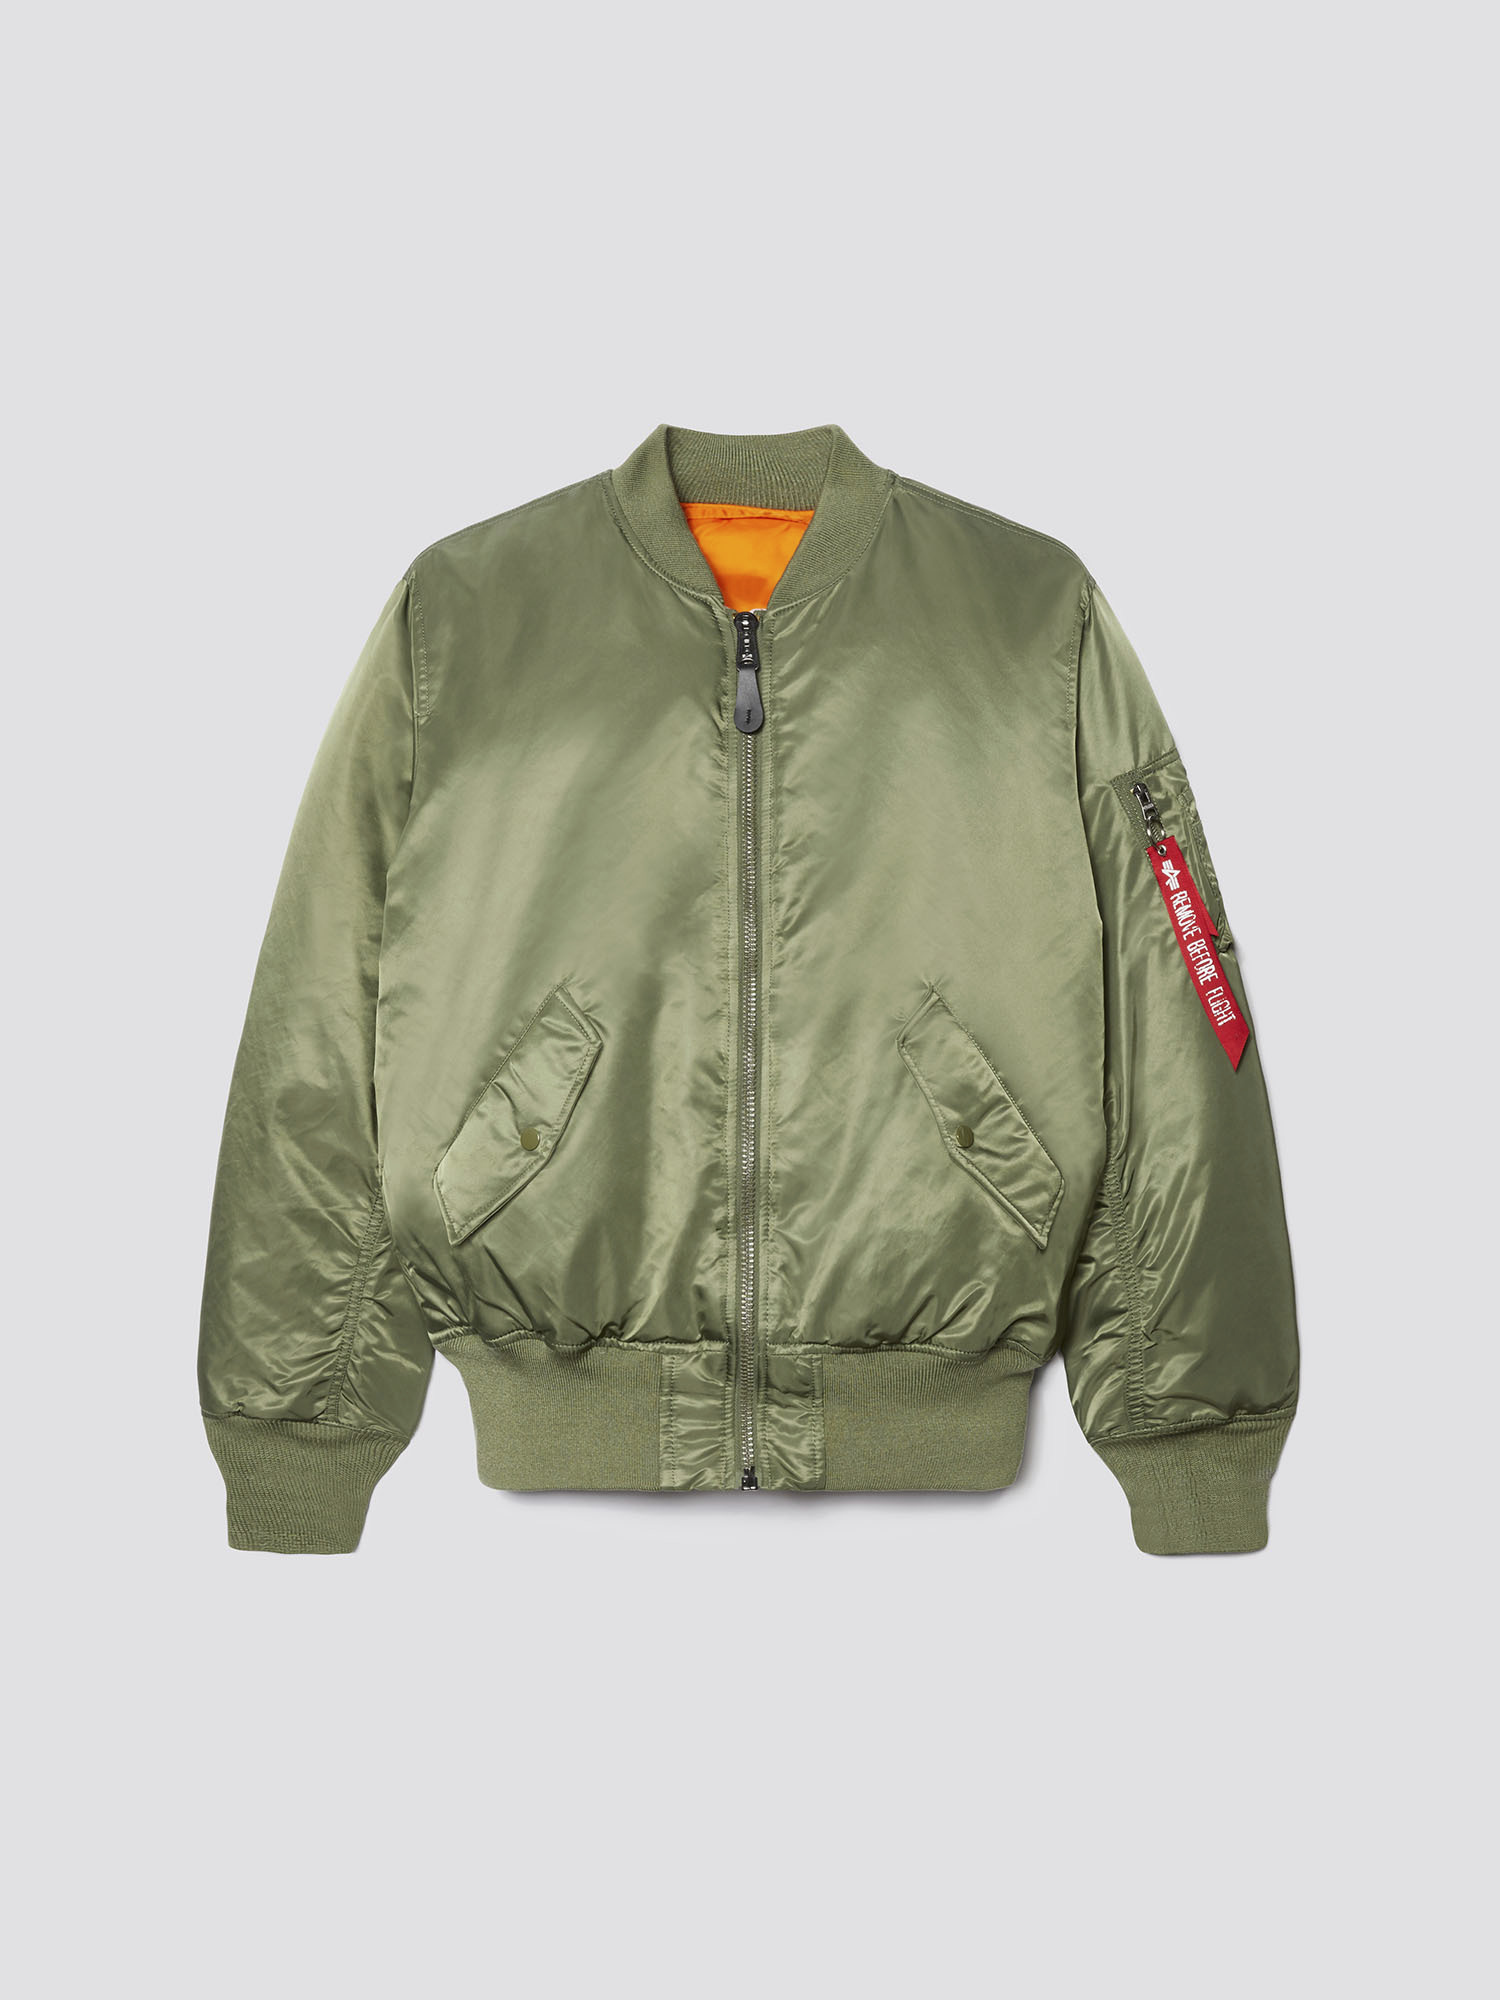 Alpha Industries – MA-1 Flight Jacket | The SHOP at the Wisconsin ...